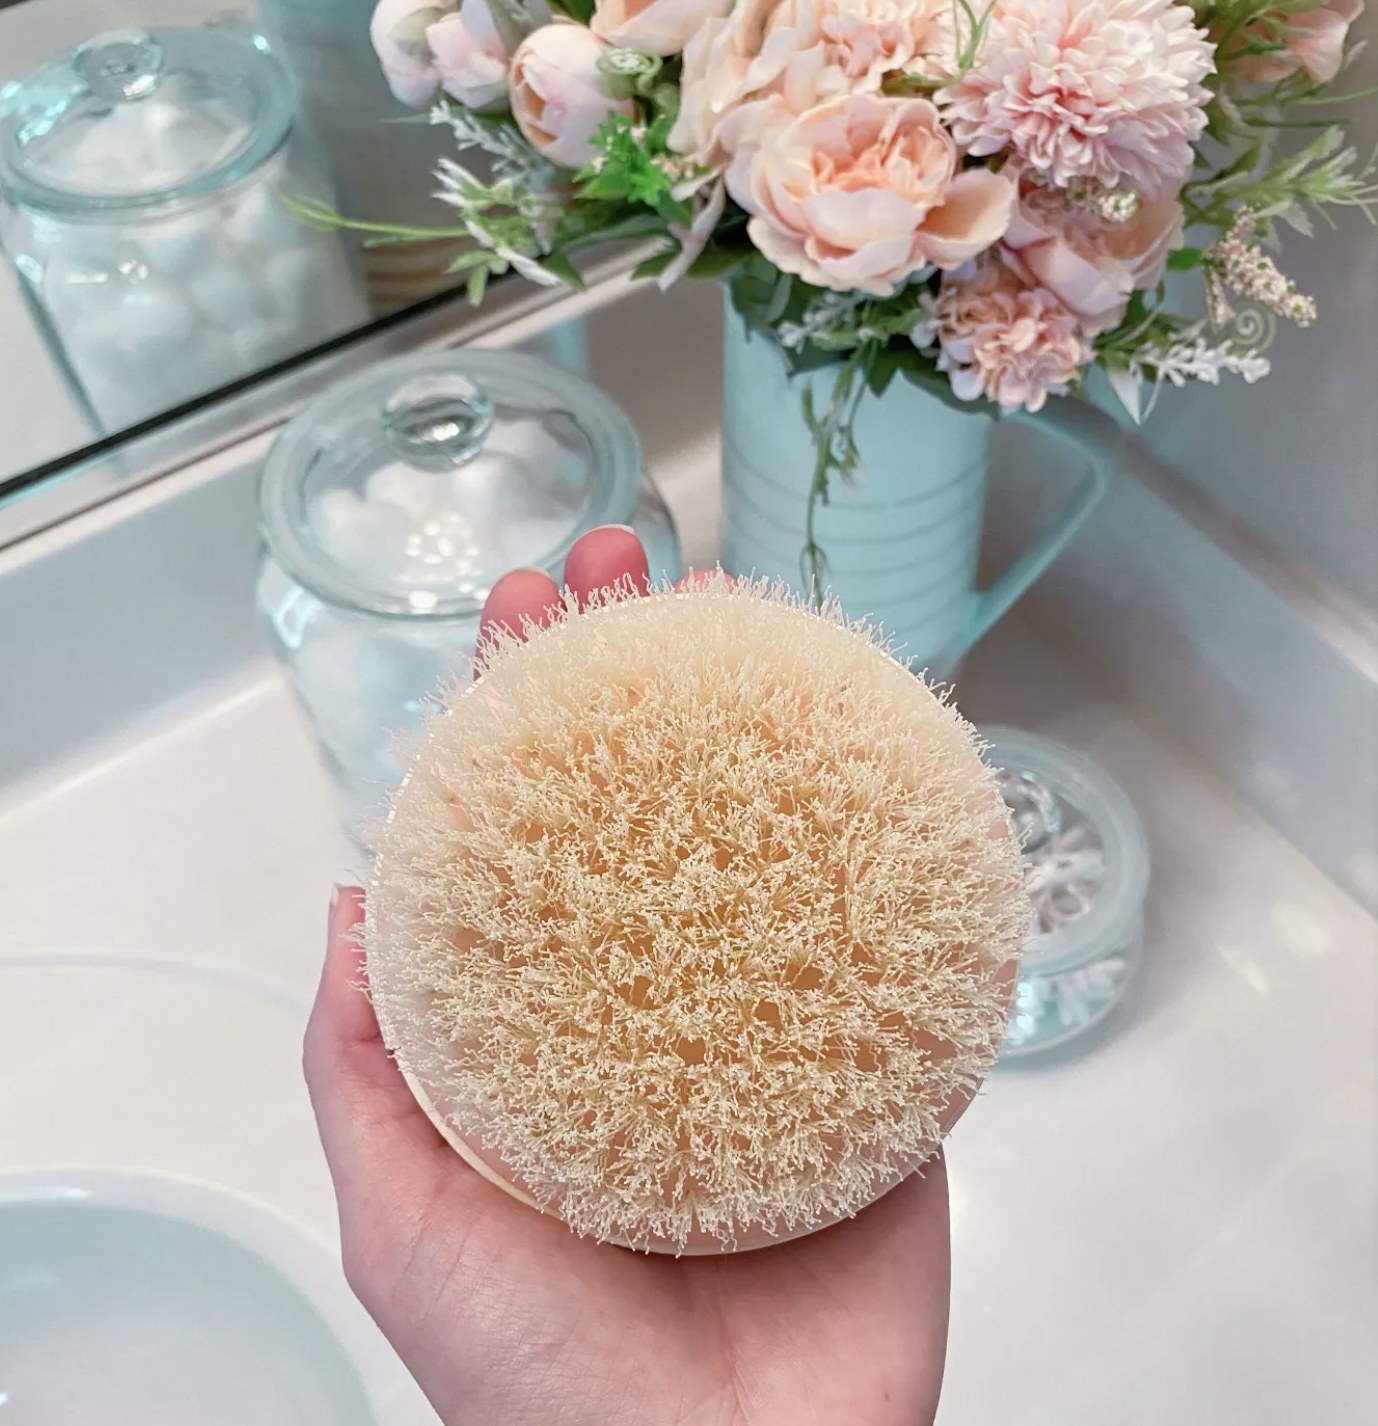 Someone holding the circular brush in the palm of their hand